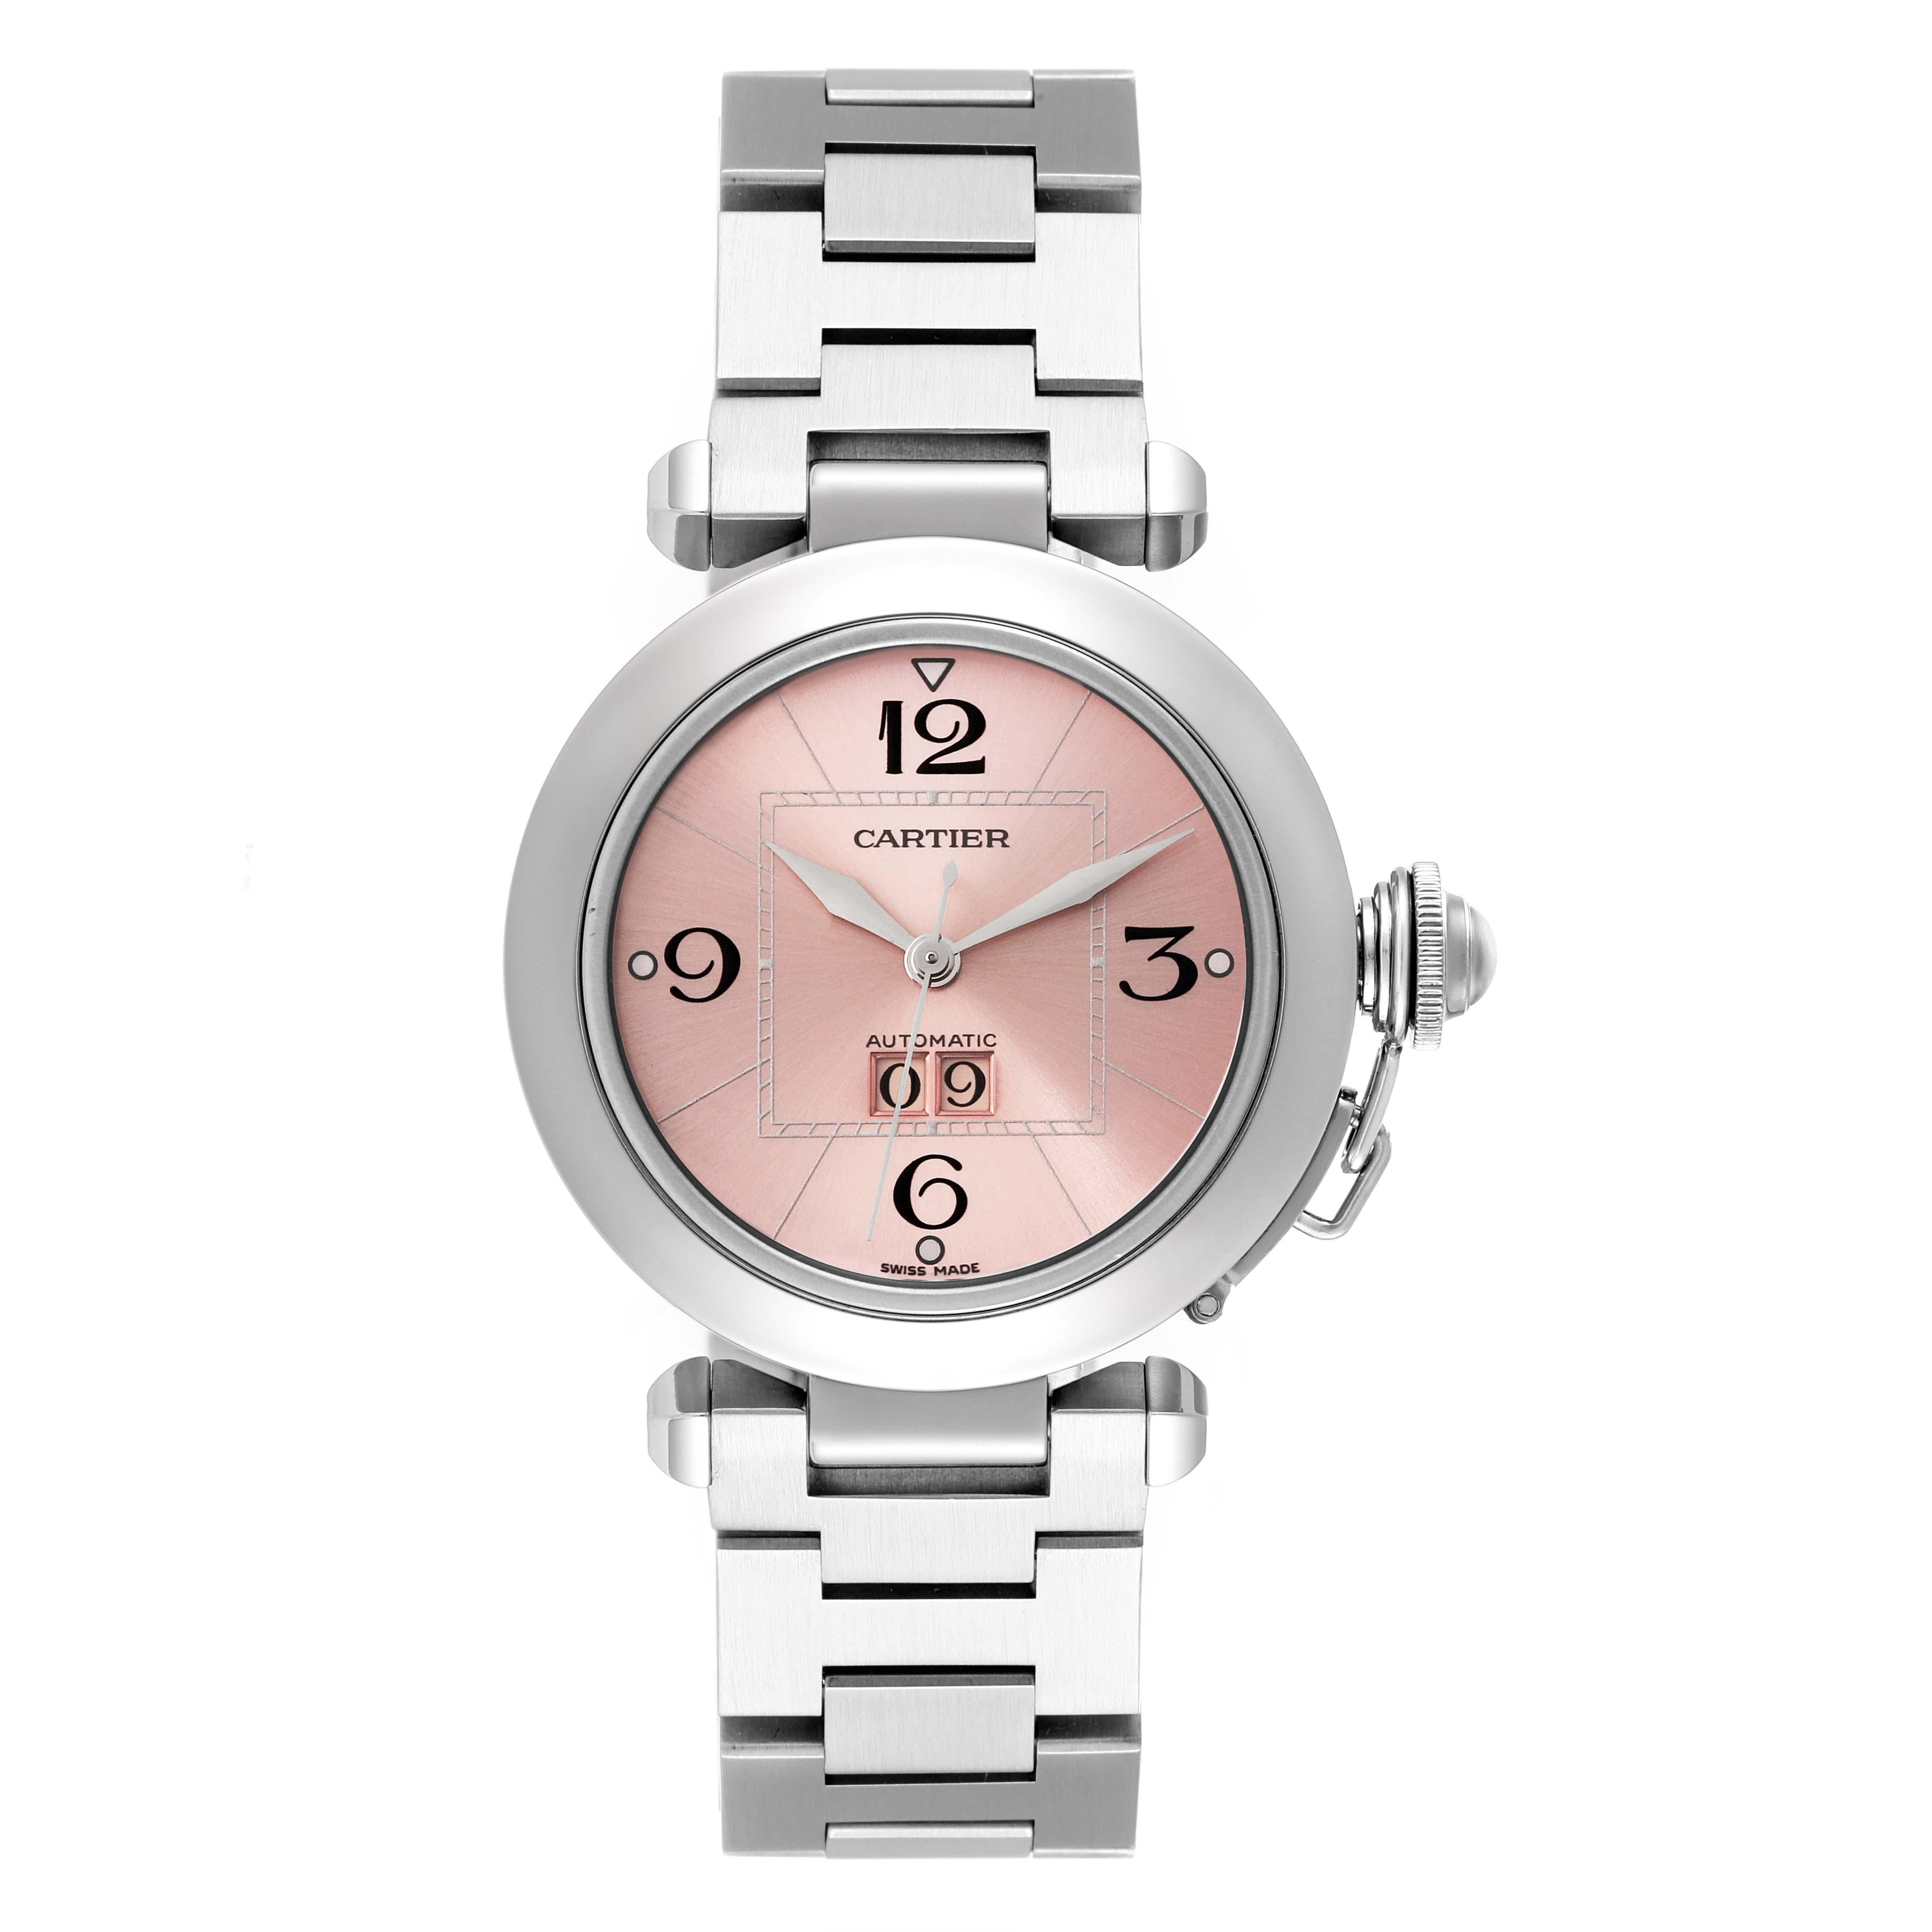 Cartier Pasha Big Date Pink Dial Steel Ladies Watch W31058M7 In Excellent Condition For Sale In Atlanta, GA